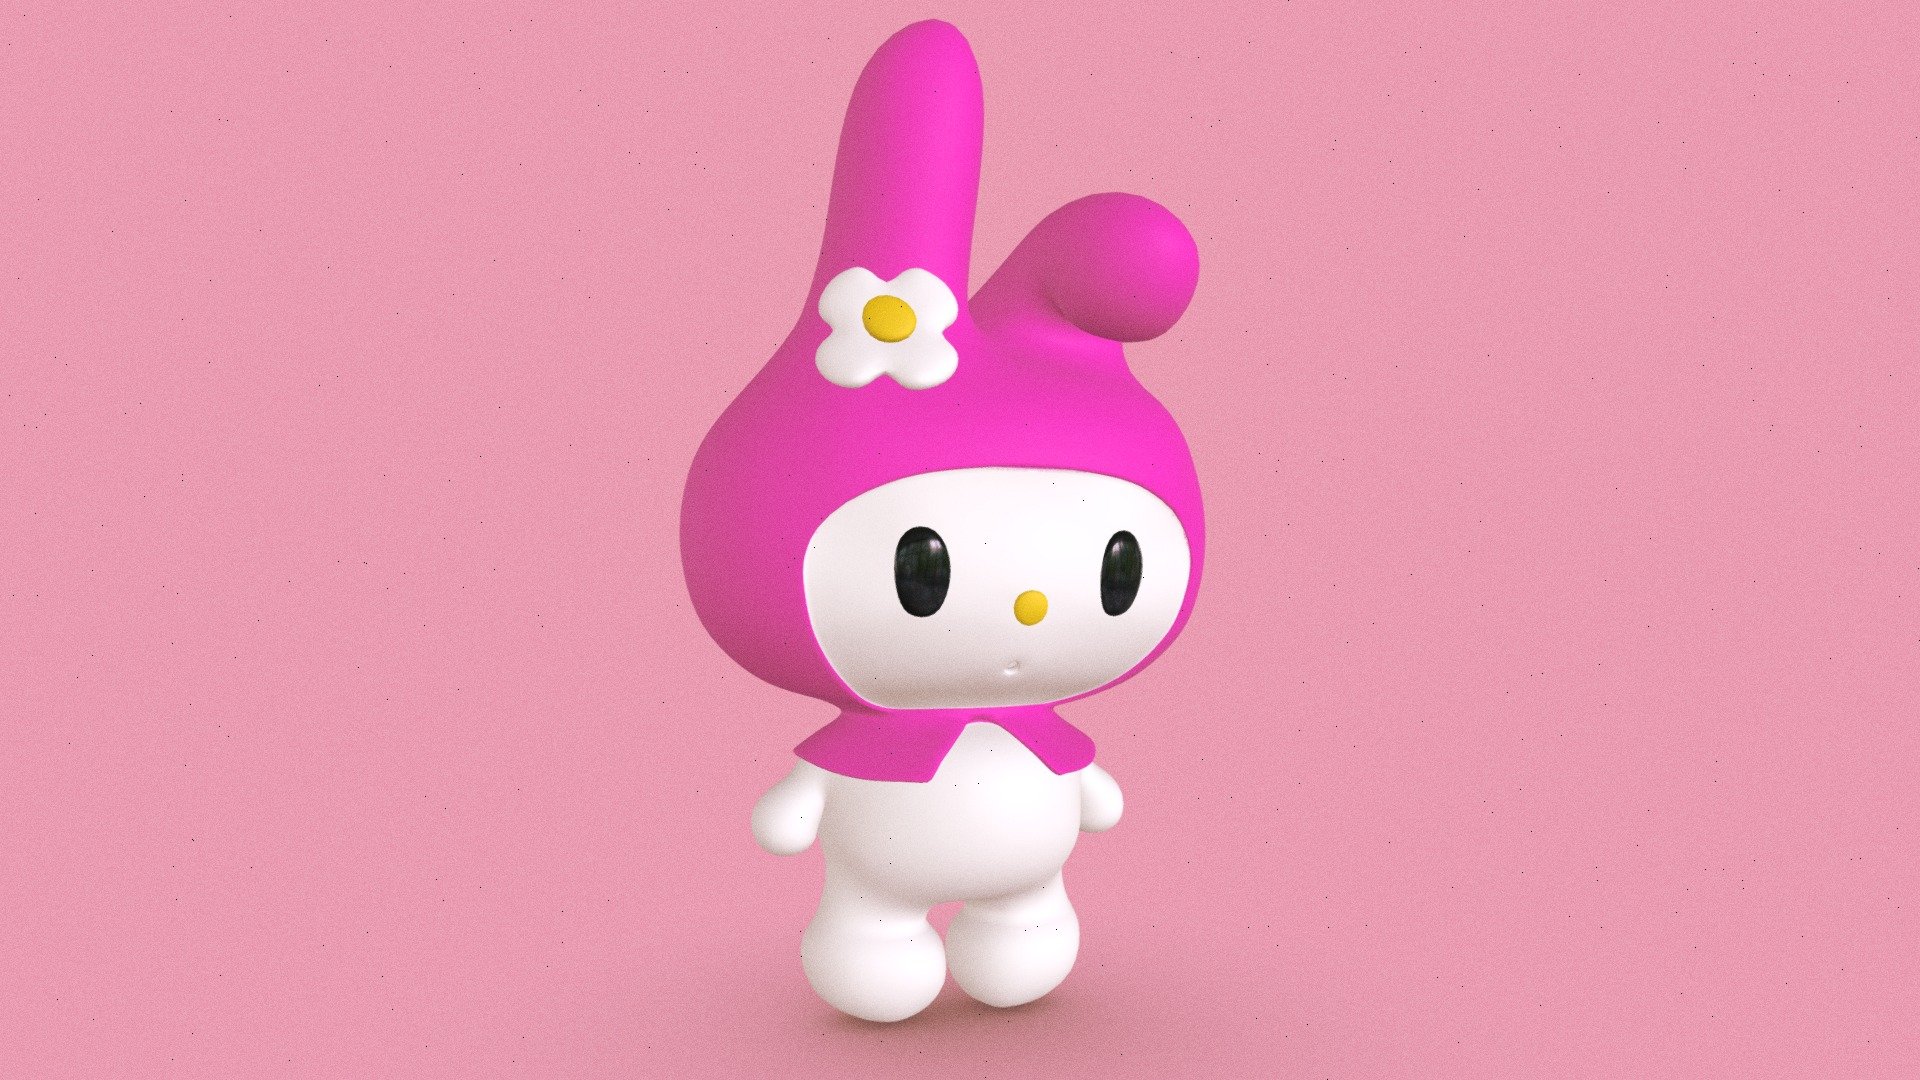 1,411 My Melody Images, Stock Photos, 3D objects, & Vectors